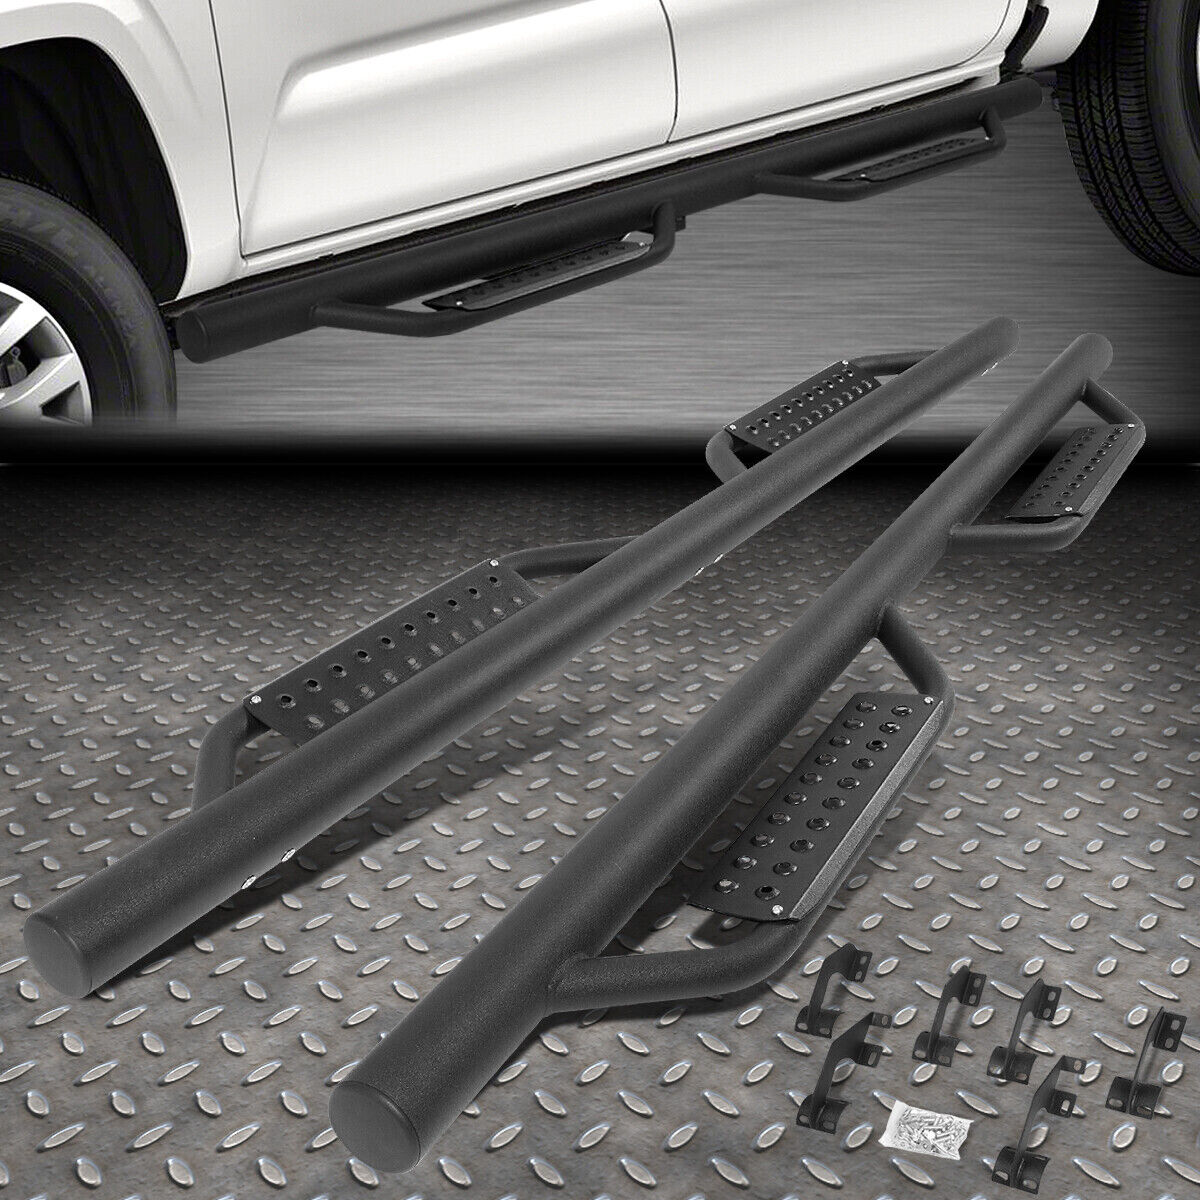 FOR 2005-2021 TACOMA DOUBLE CAB ROUND BAR SIDE STEP NERF BAR RUNNING BOARDS